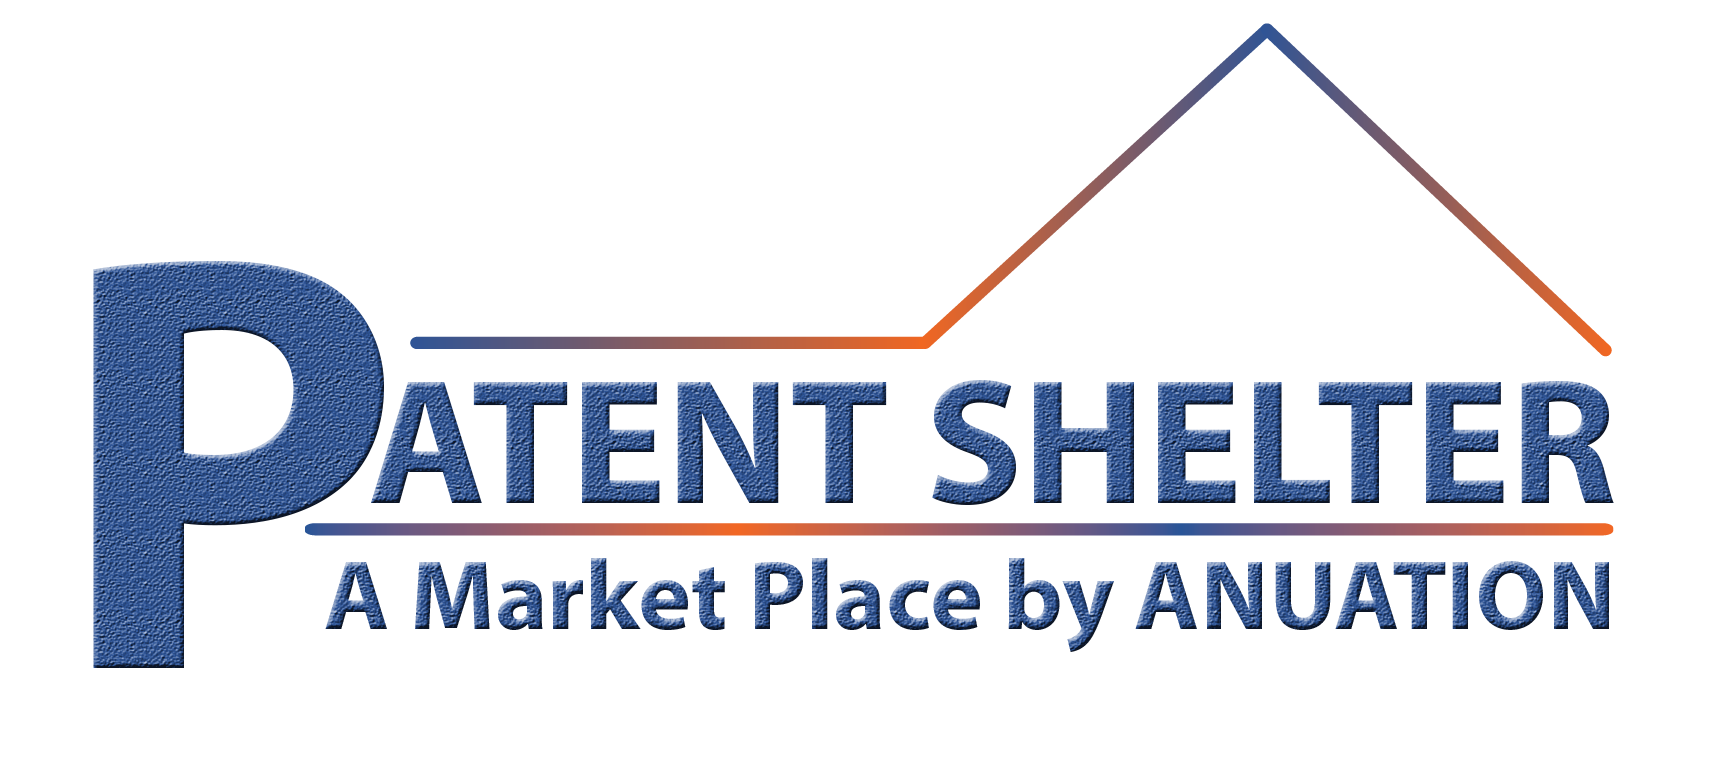 Patent Shelter